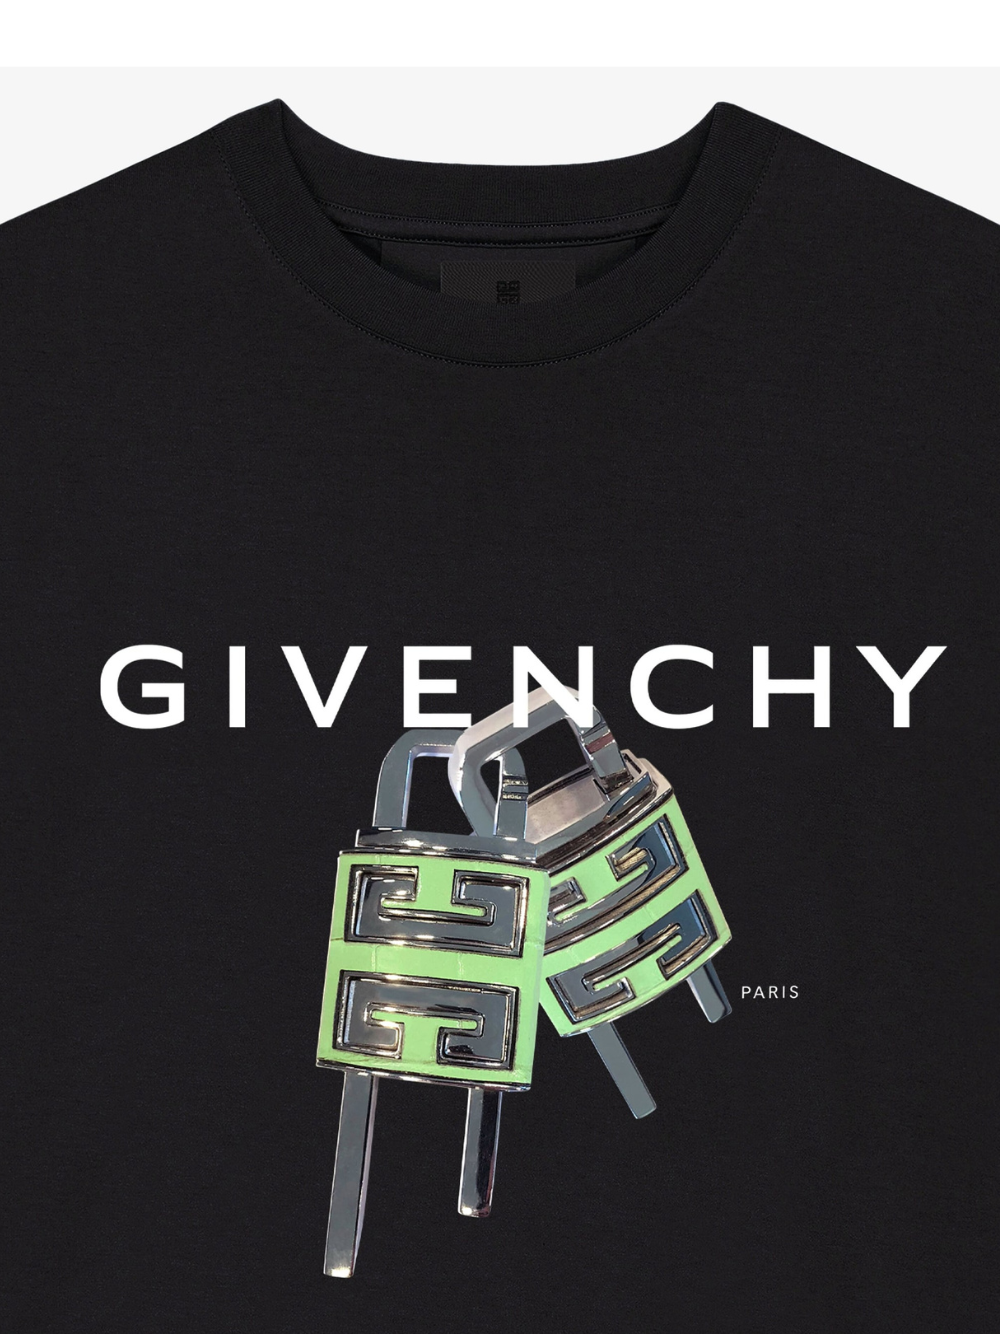 Givenchy 4G Lock T-Shirt Black Slim Fit | Hype Vault Kuala Lumpur | Asia's Top Trusted High-End Sneakers and Streetwear Store | Guaranteed 100% authentic